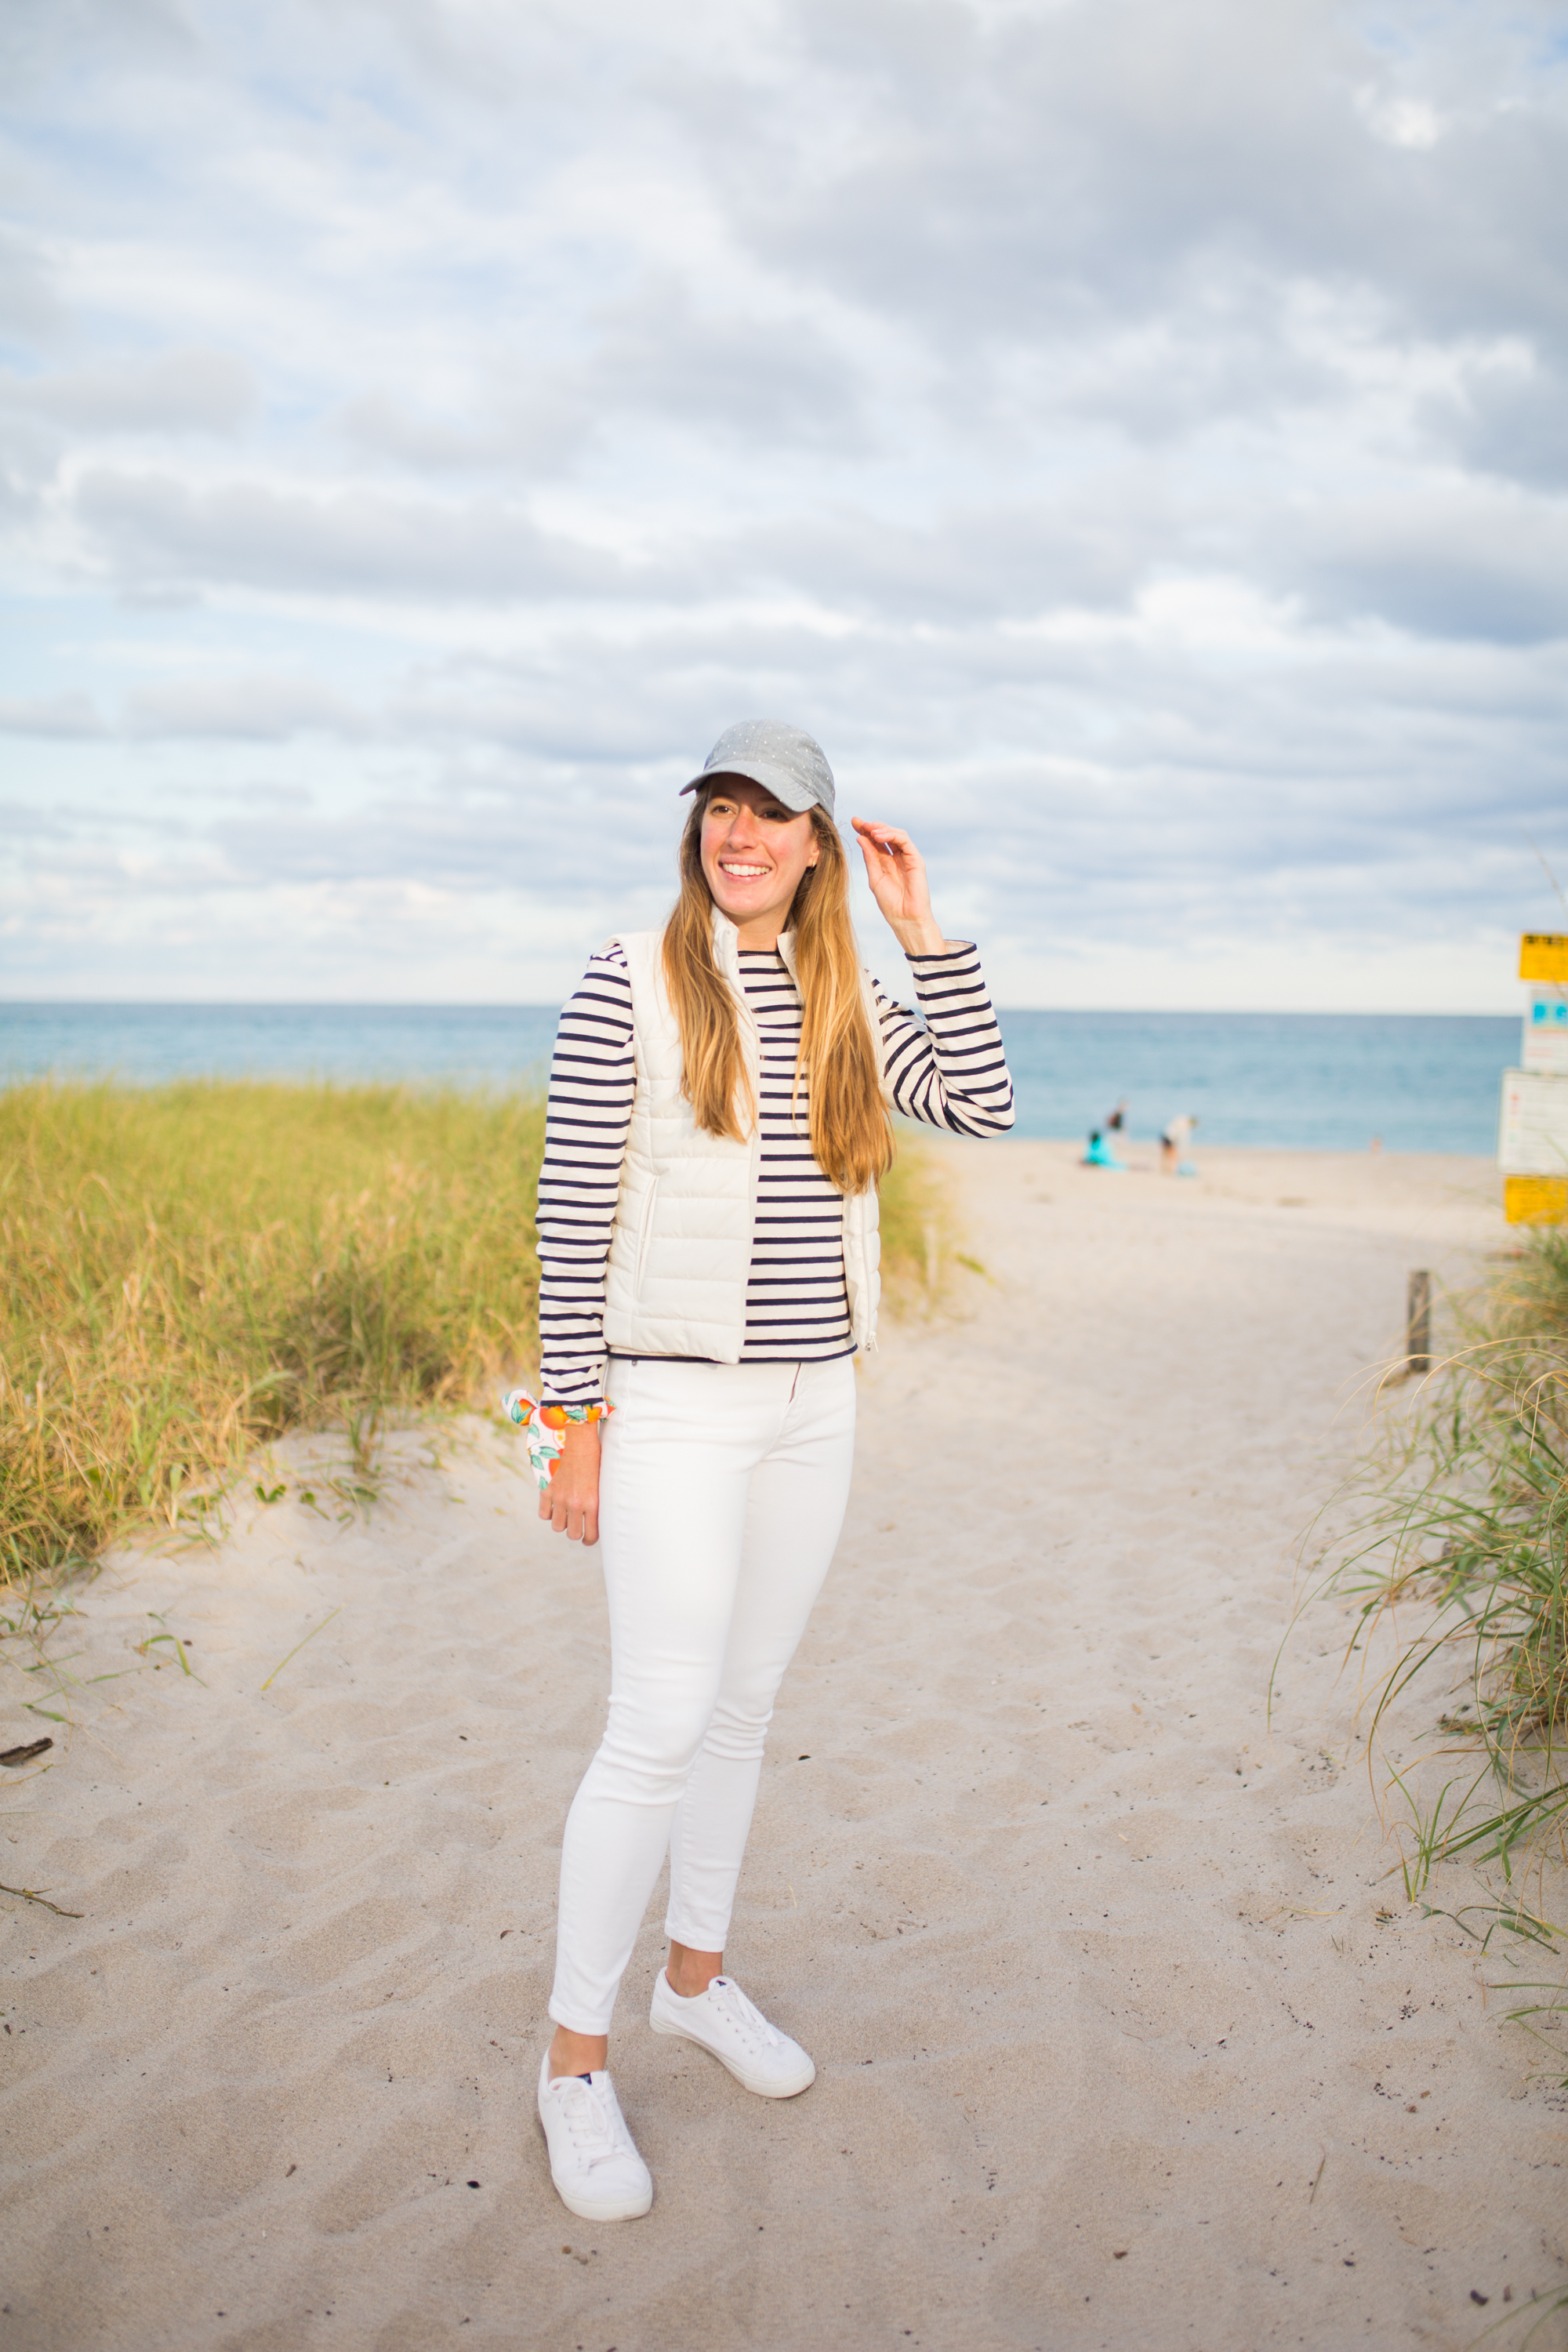 3 Ways to Wear a Long Sleeve Striped Shirt / Causal Winter Outfit / Beach Outfit / White Jeans / Palm Beach, Florida / Striped Top / Sunshine Style - A Florida Fashion Blog by Katie